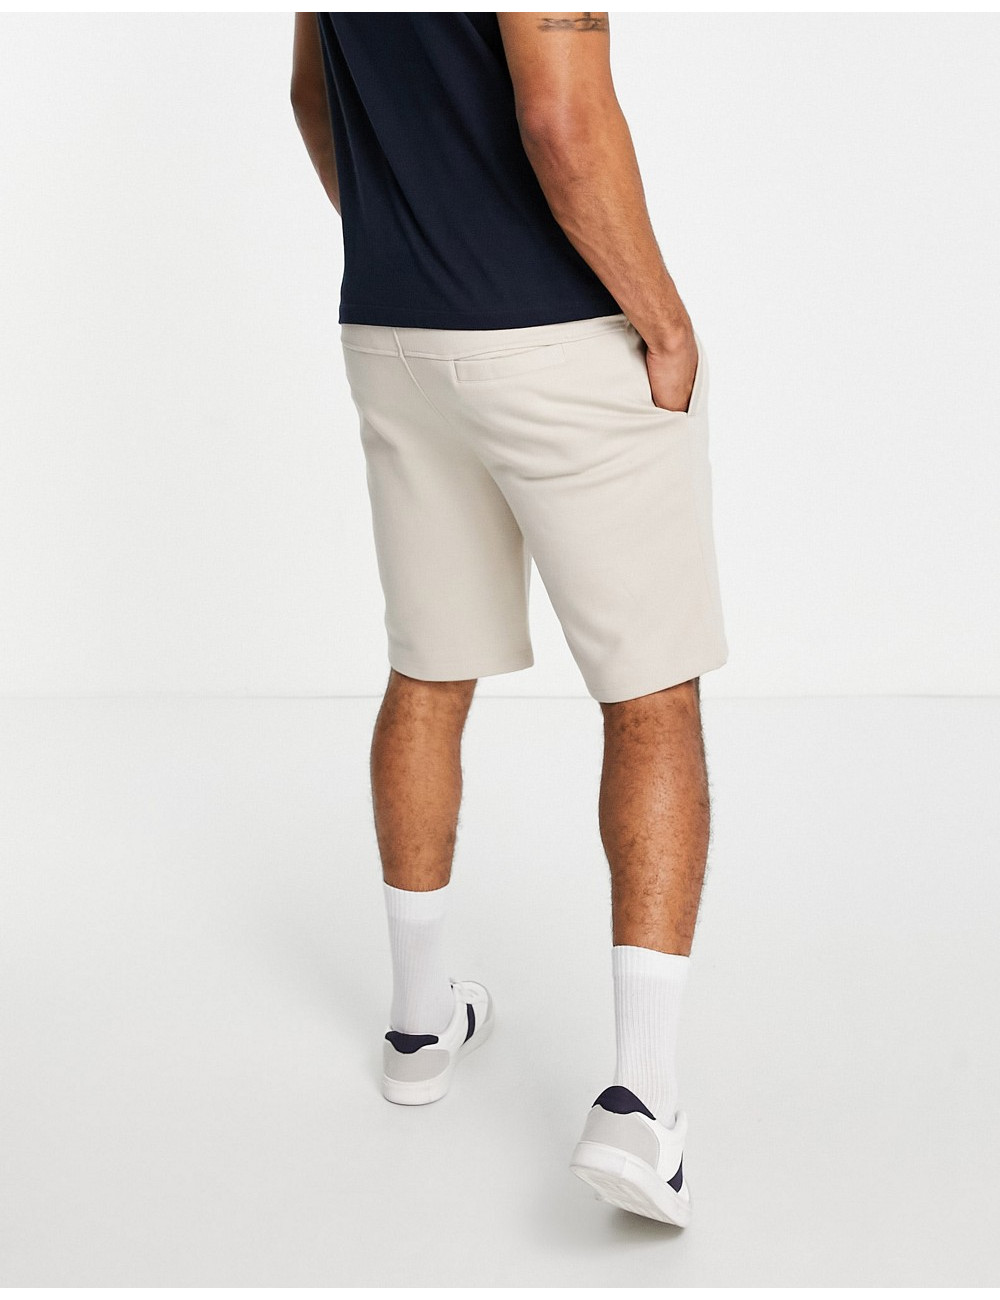 Bench jersey shorts in stone